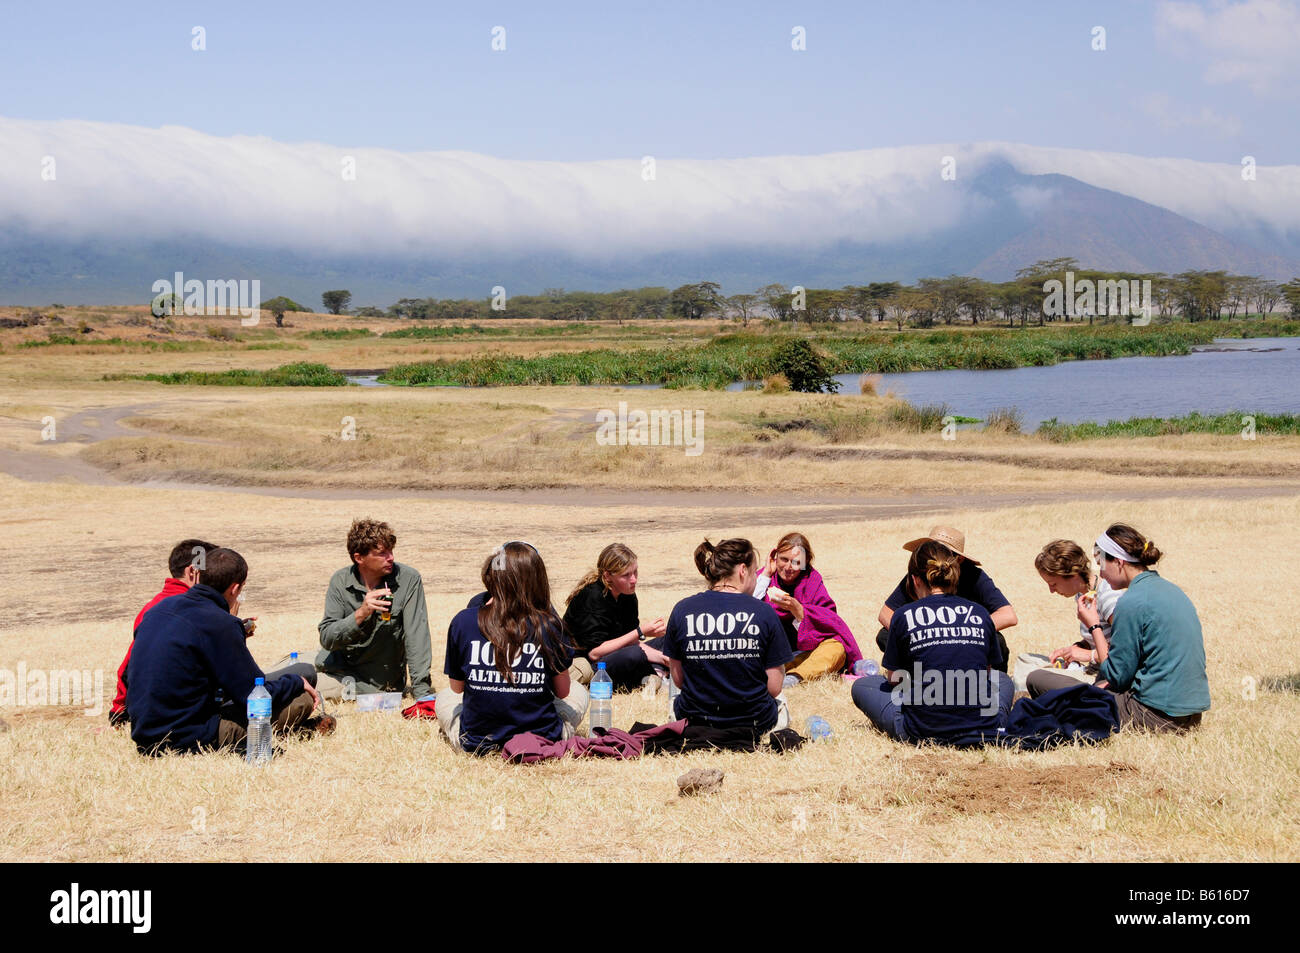 Tourists picnicing in front of the cloud covered edge of the Ngorongoro-crater, Ngorongoro Conservation Area, Tanzania, Africa Stock Photo